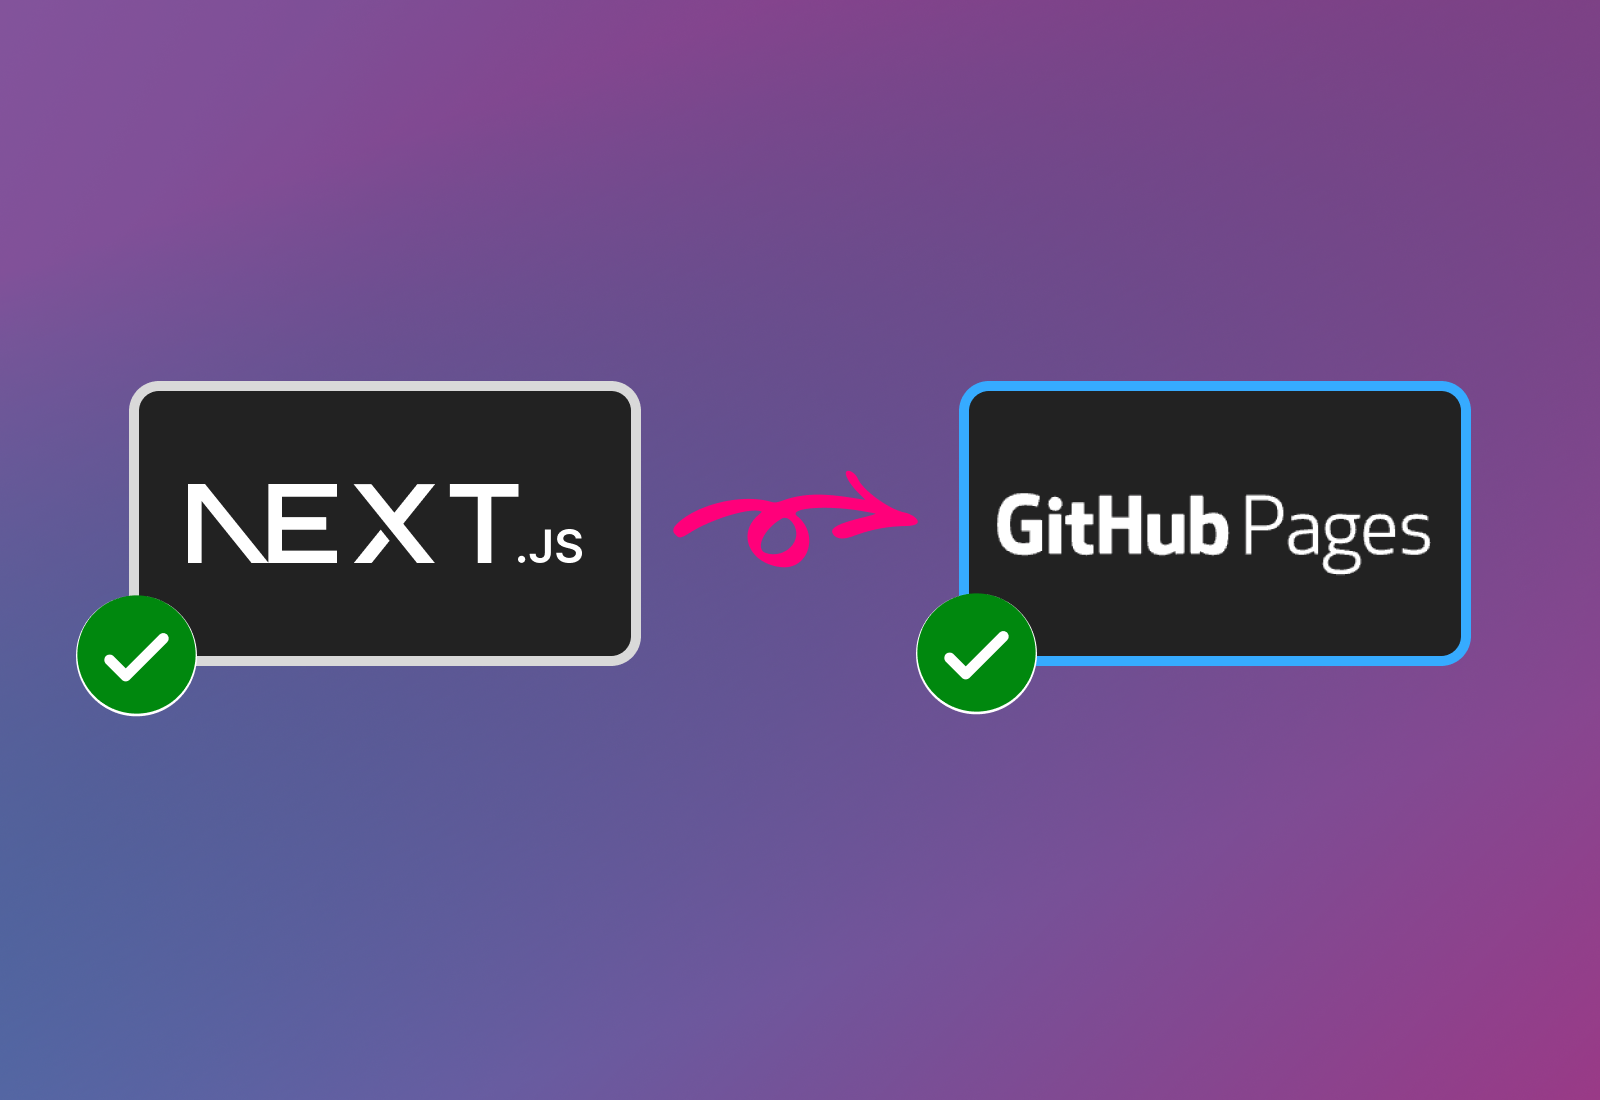 How to Deploy Next.js Apps to Github Pages